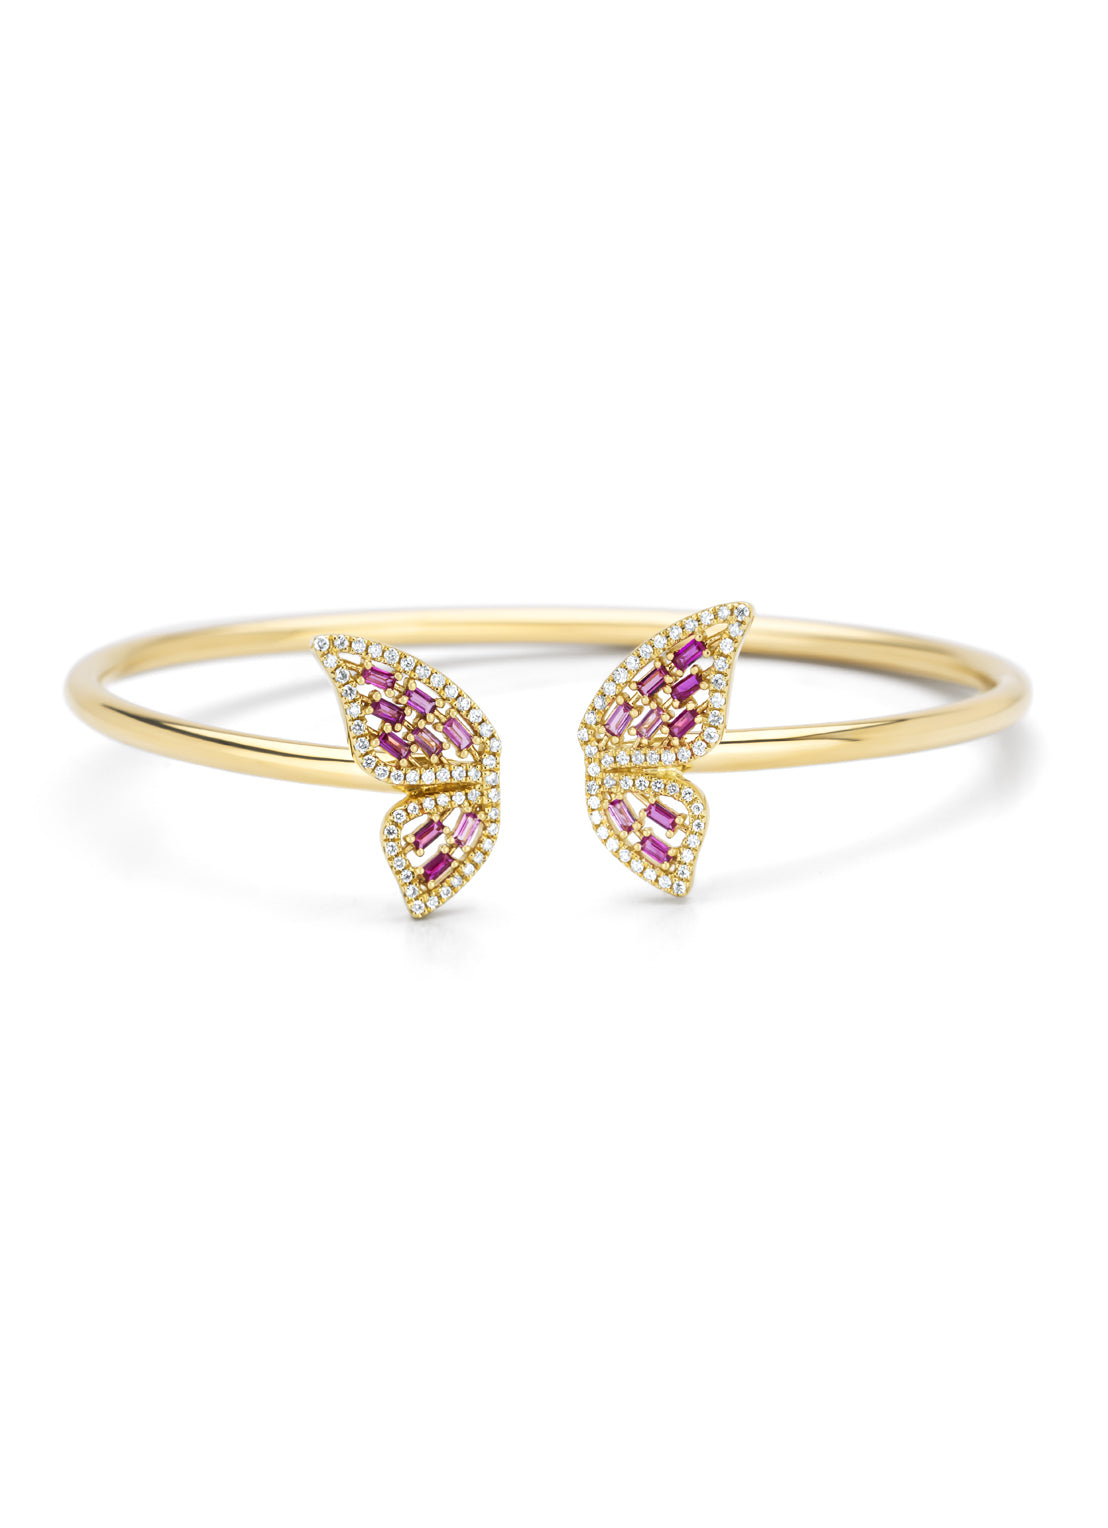 Yellow gold bracelet, 0.36 ct pink sapphire, butterfly kisses